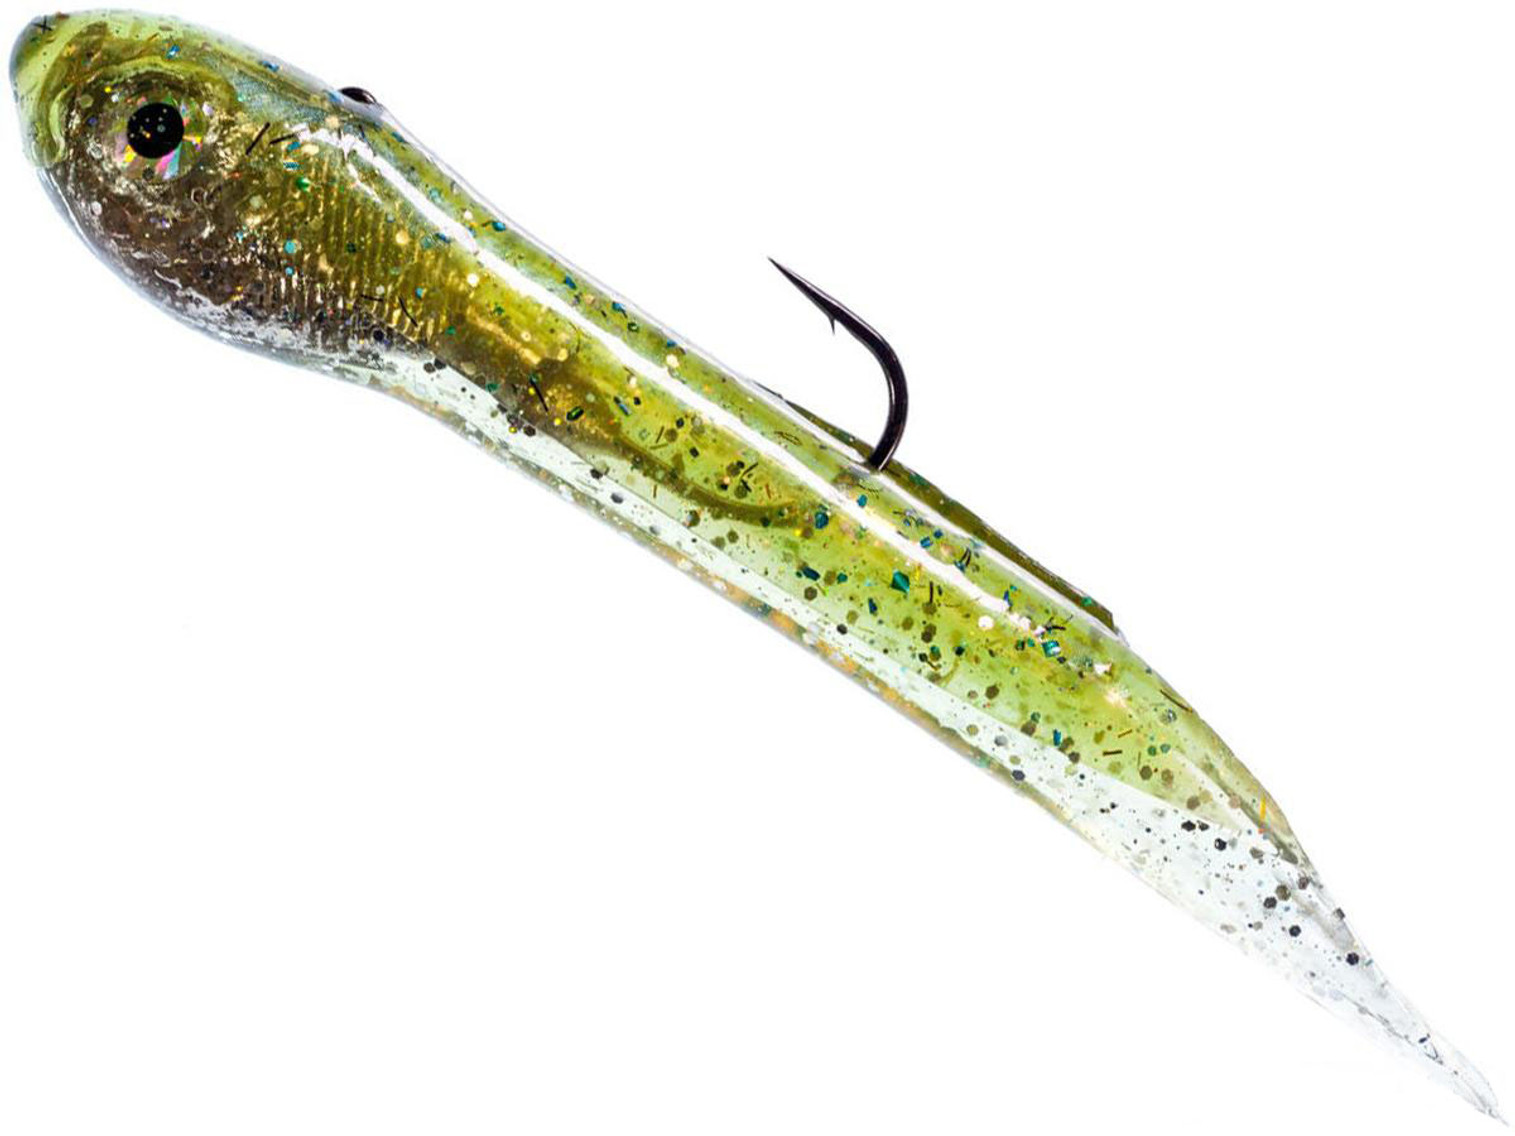 Hook Up Baits Handcrafted Soft Fishing Jigs (Color: Sexy Sardine / 8" / 3 oz)